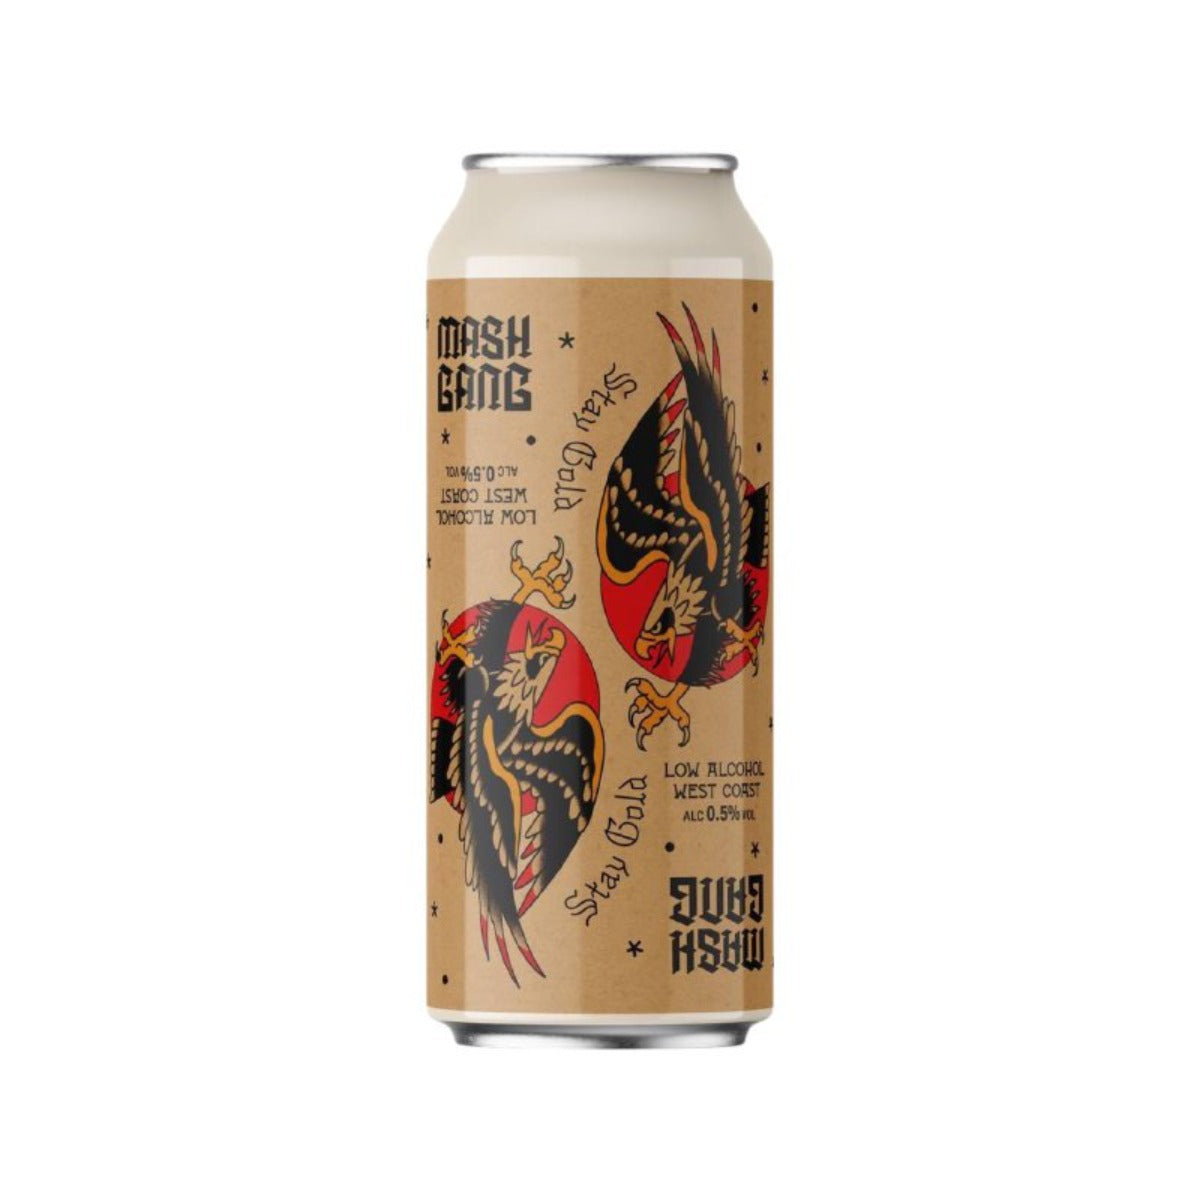 Stay Gold - 0.5% - West Coast Pale - 440ml